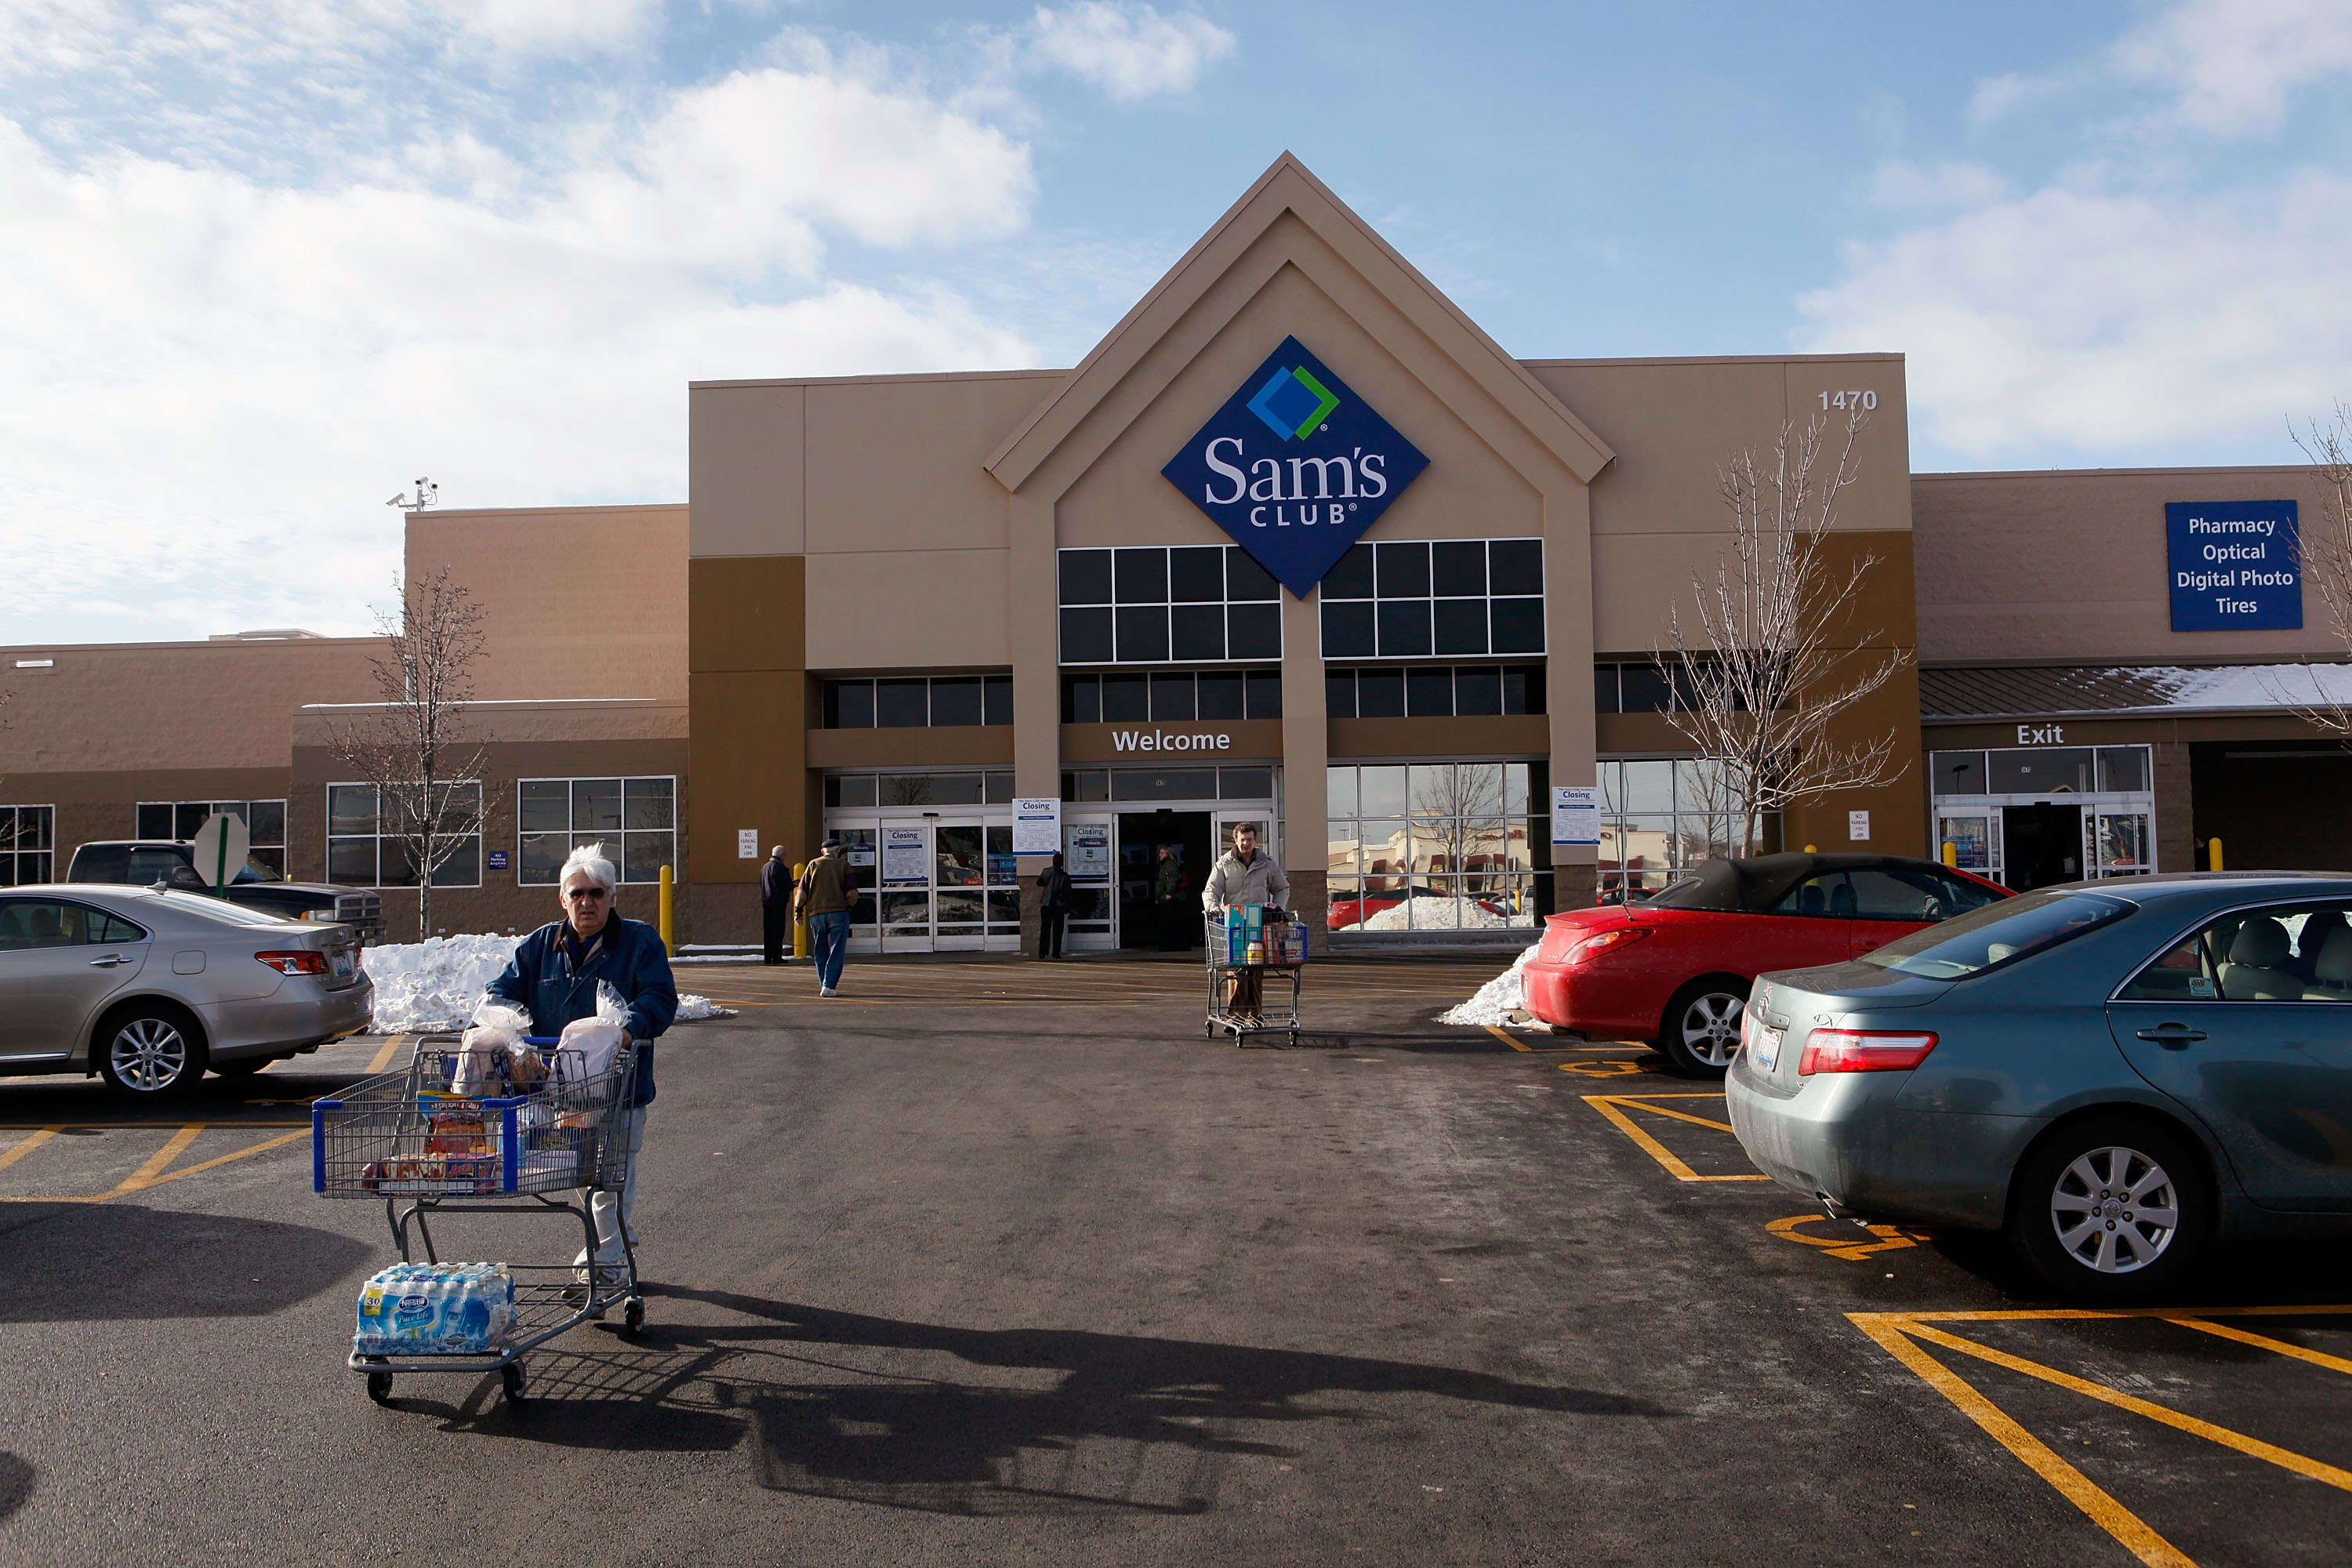 What Time Does Sam’s Club Close on Christmas Eve 2020?